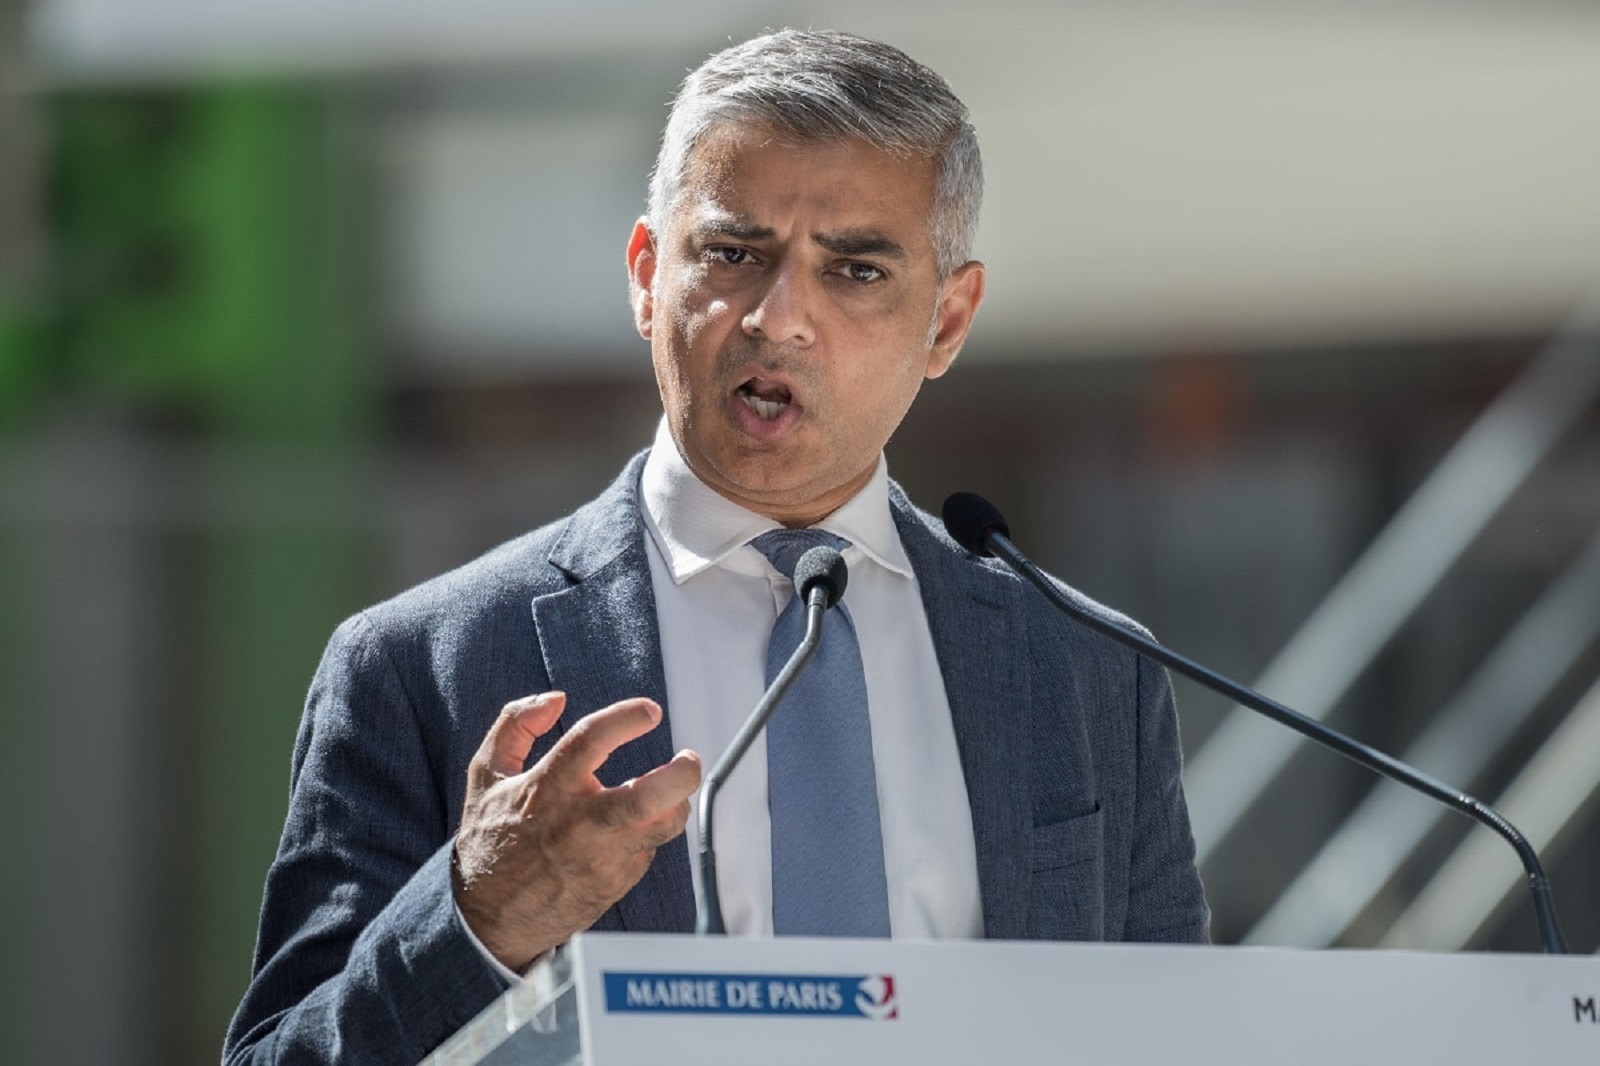 Image Credit: Shutterstock / Frederic Legrand – COMEO <p><span>Sadiq Khan himself blasted Anderson’s comments, shaming them as “Islamophobic” and Anti-Muslim,” before criticizing the Party’s response to the remarks.</span></p>